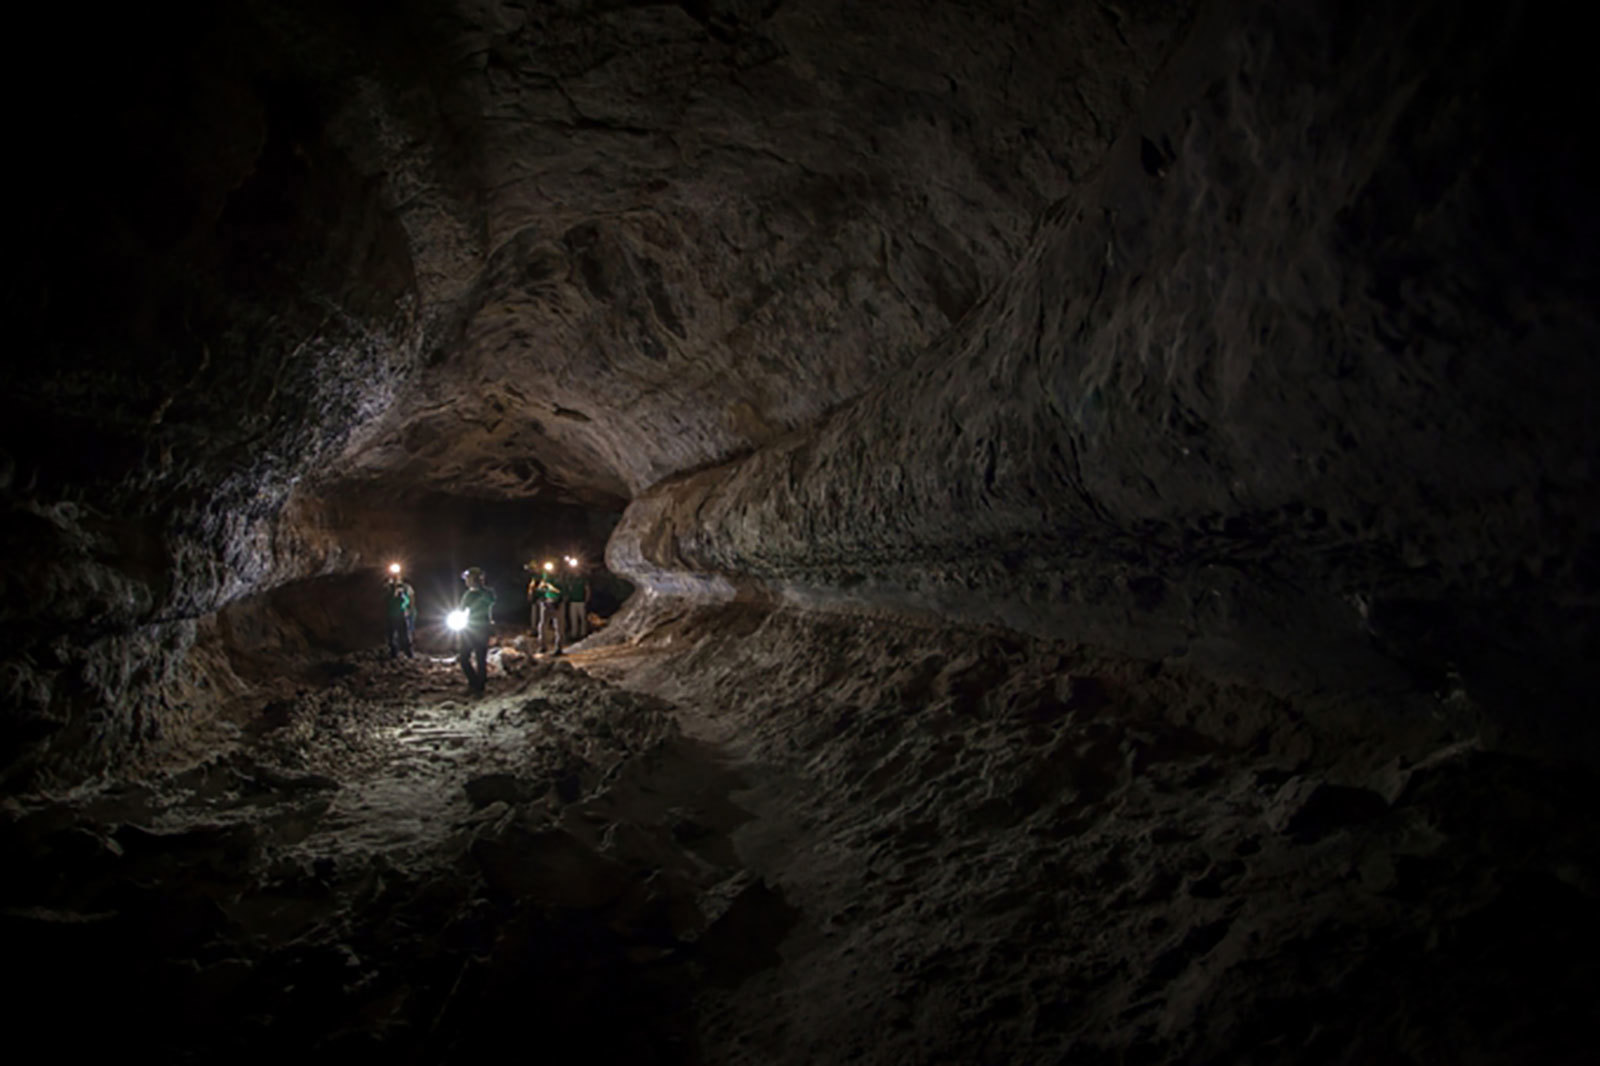 Lava tubes discovered on the moon and Mars wide enough to fit entire cities